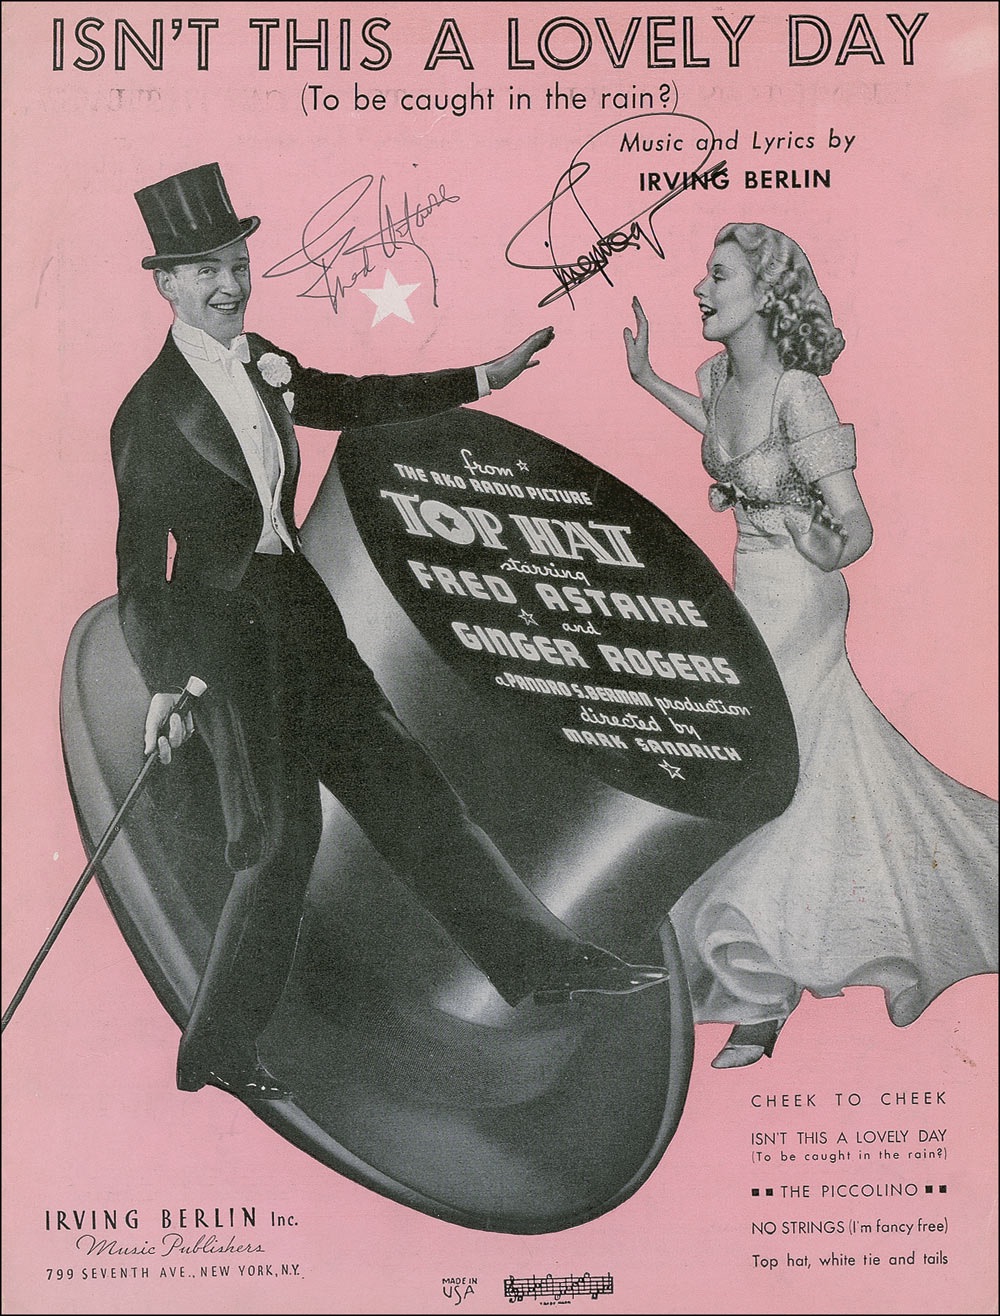 Lot #911 Fred Astaire and Ginger Robers